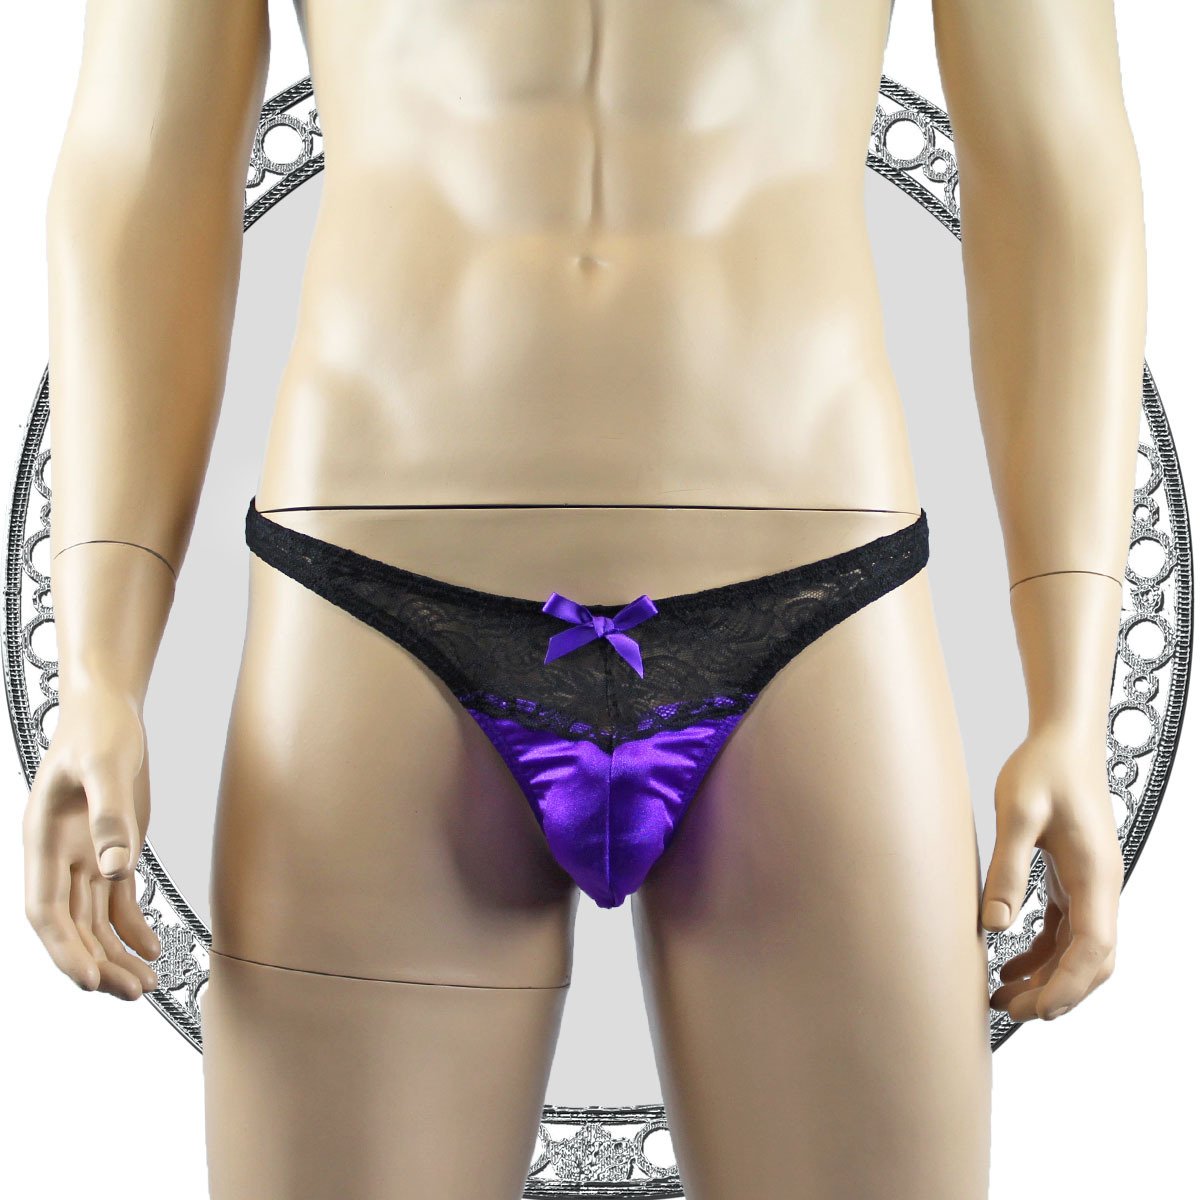 Mens Lace Bra Top Lingerie and Thong for Men Purple and Black